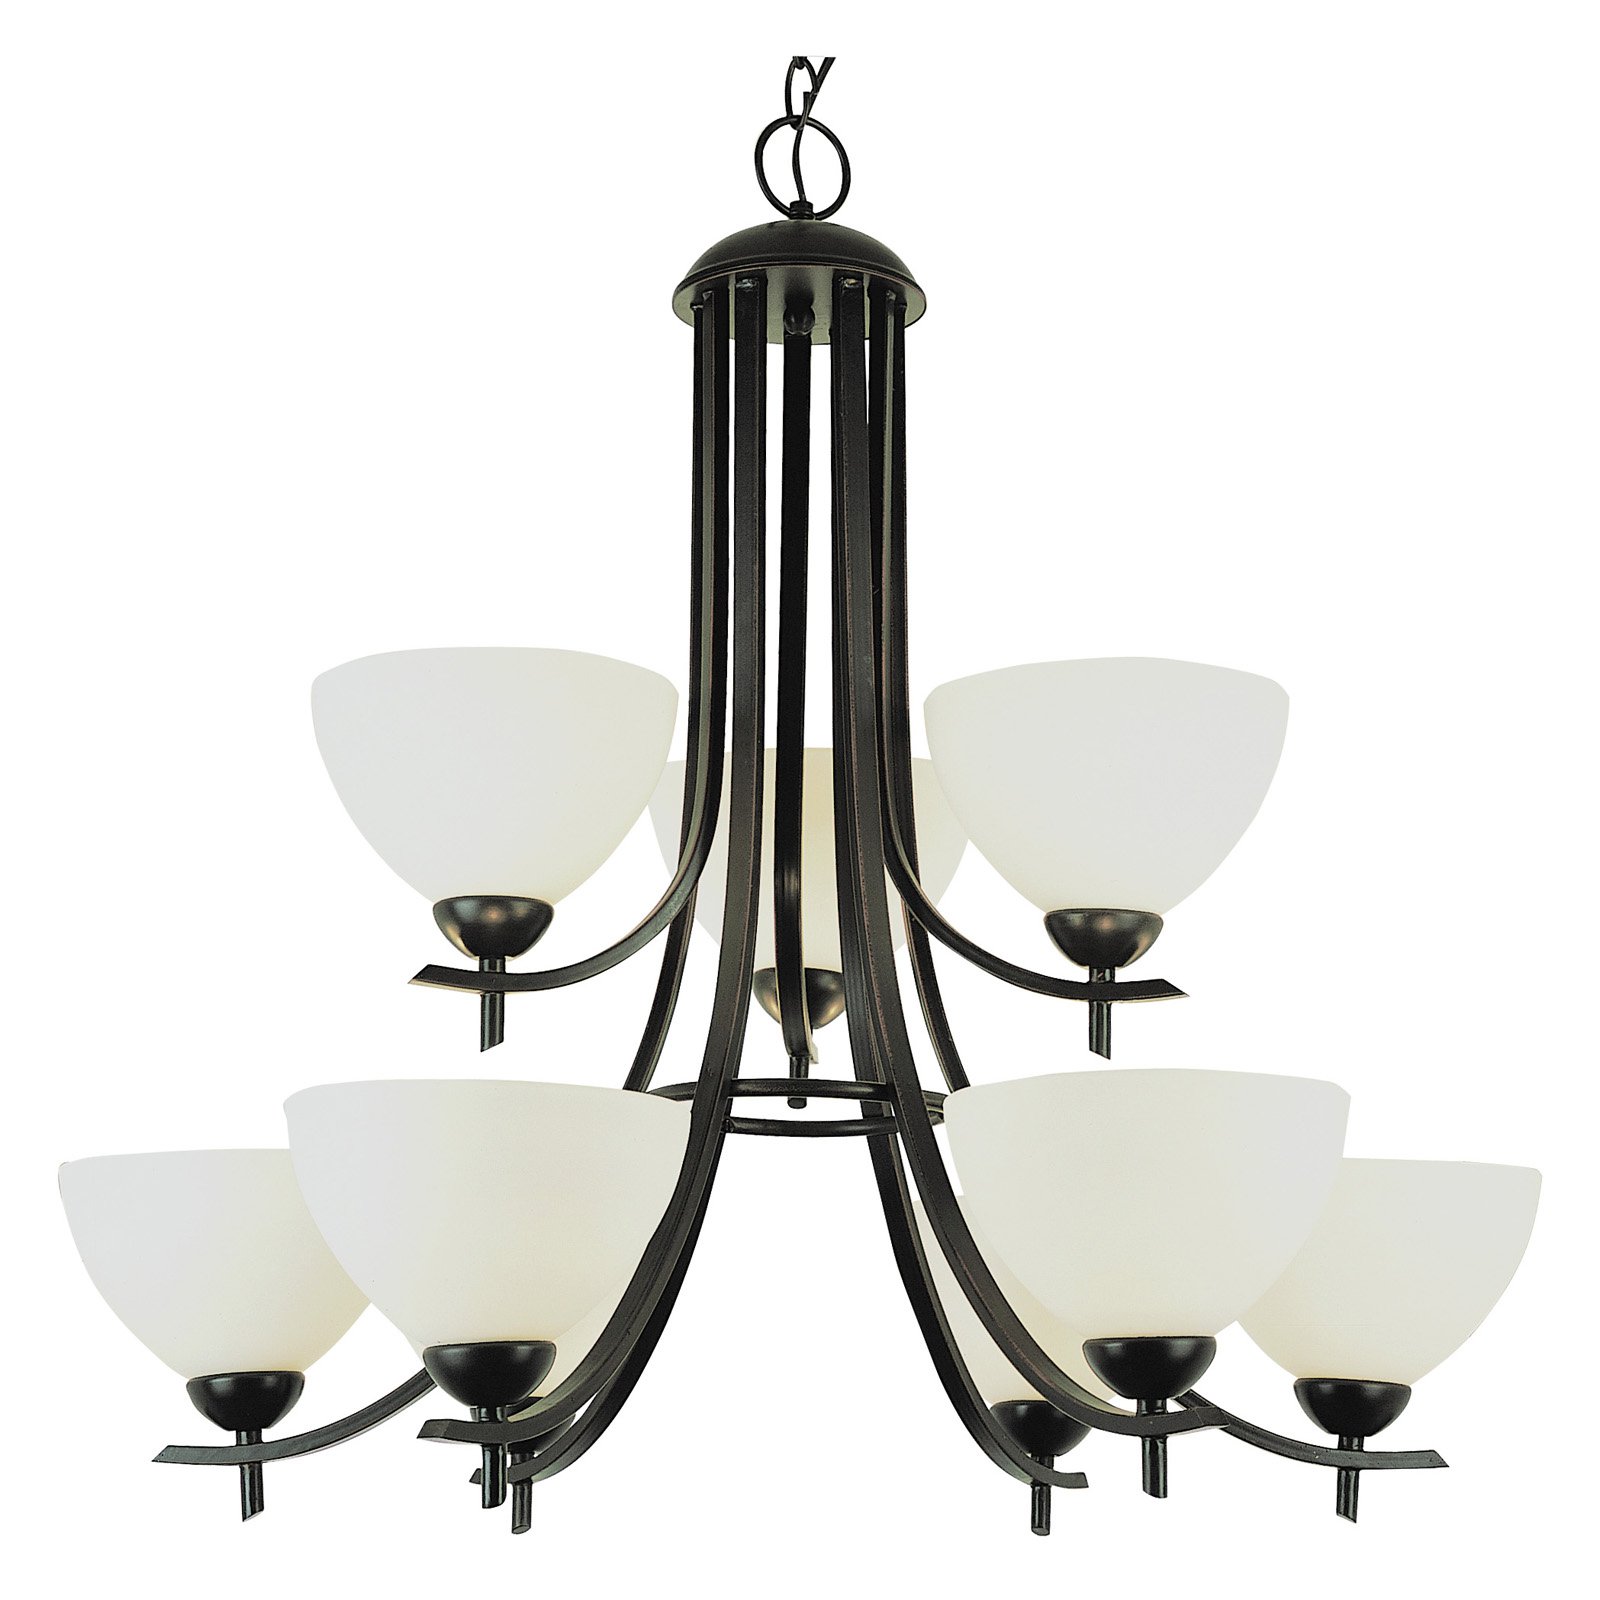 Trans Globe 8179 ROB Chandelier - Rubbed Oil Bronze - 30W in. - image 1 of 2